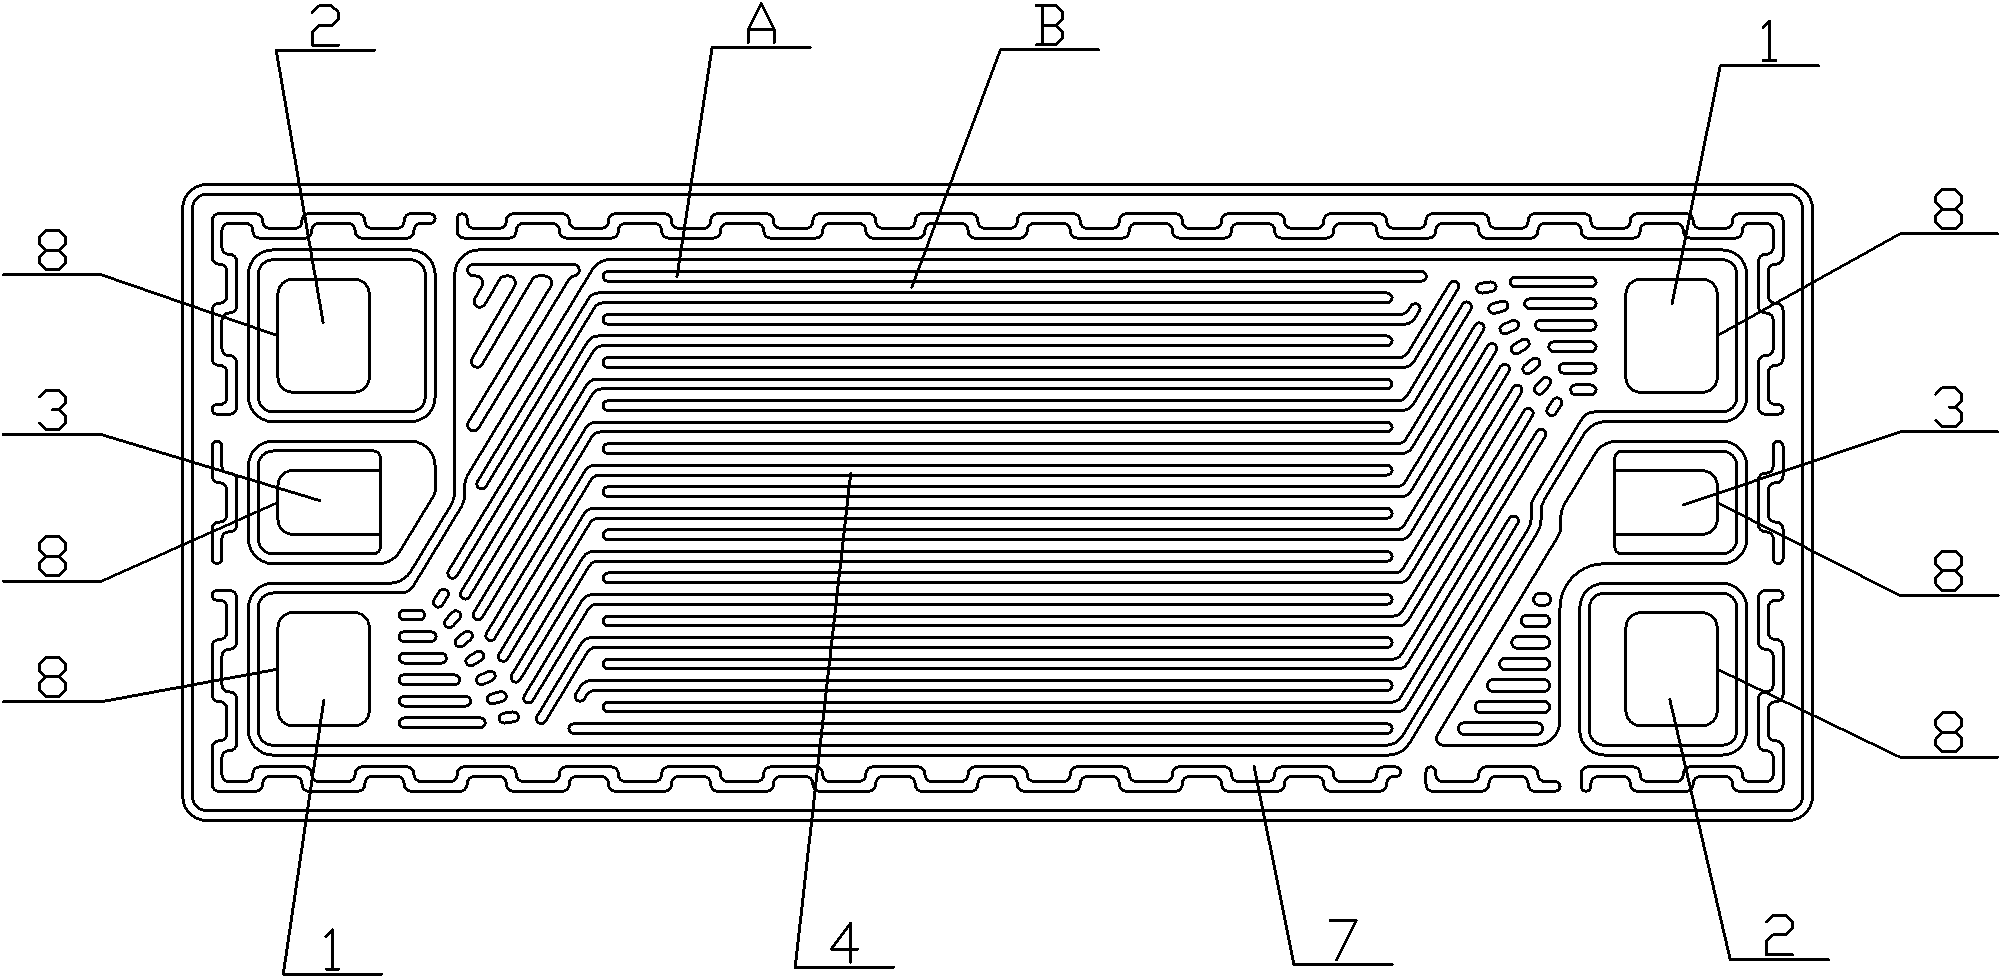 Metallic bipolar plate of proton exchange membrane fuel cell and single cell and electric stack formed by same